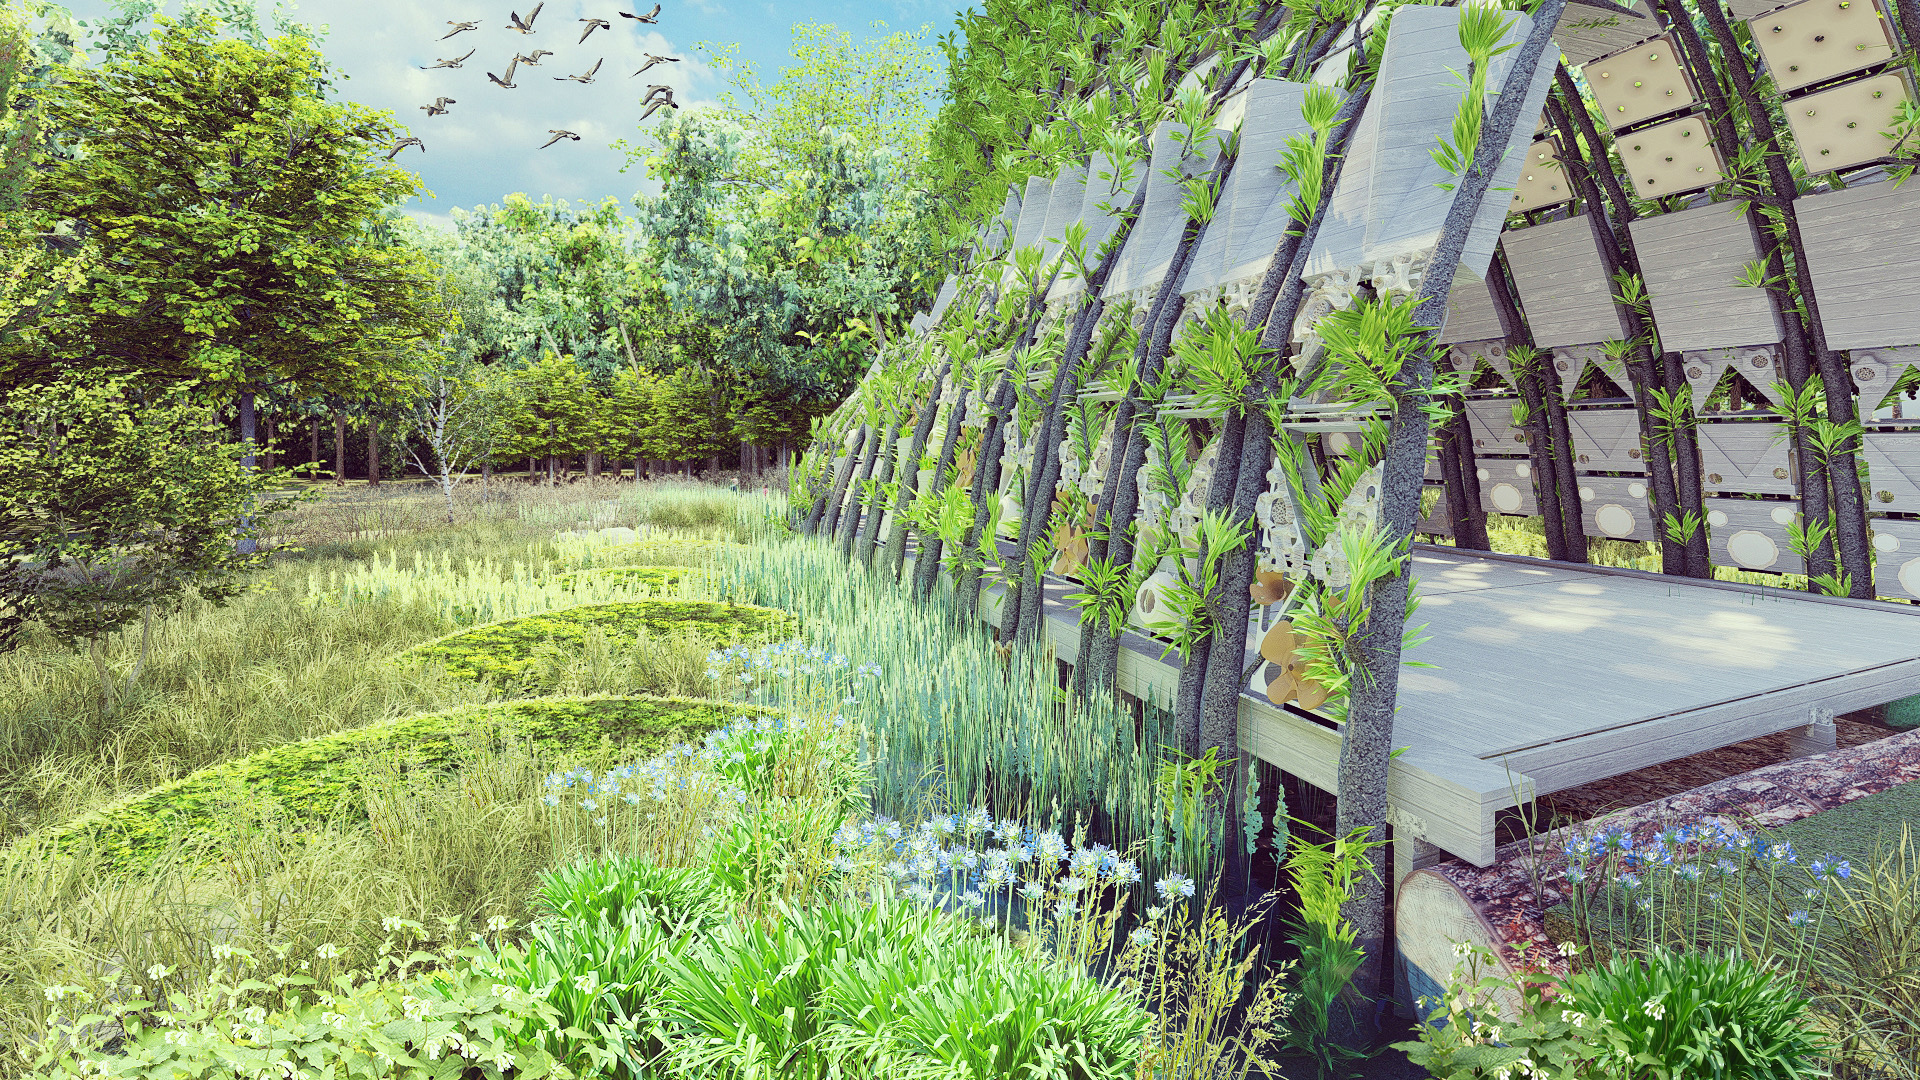 Rendering of a natural environment with a built structure.